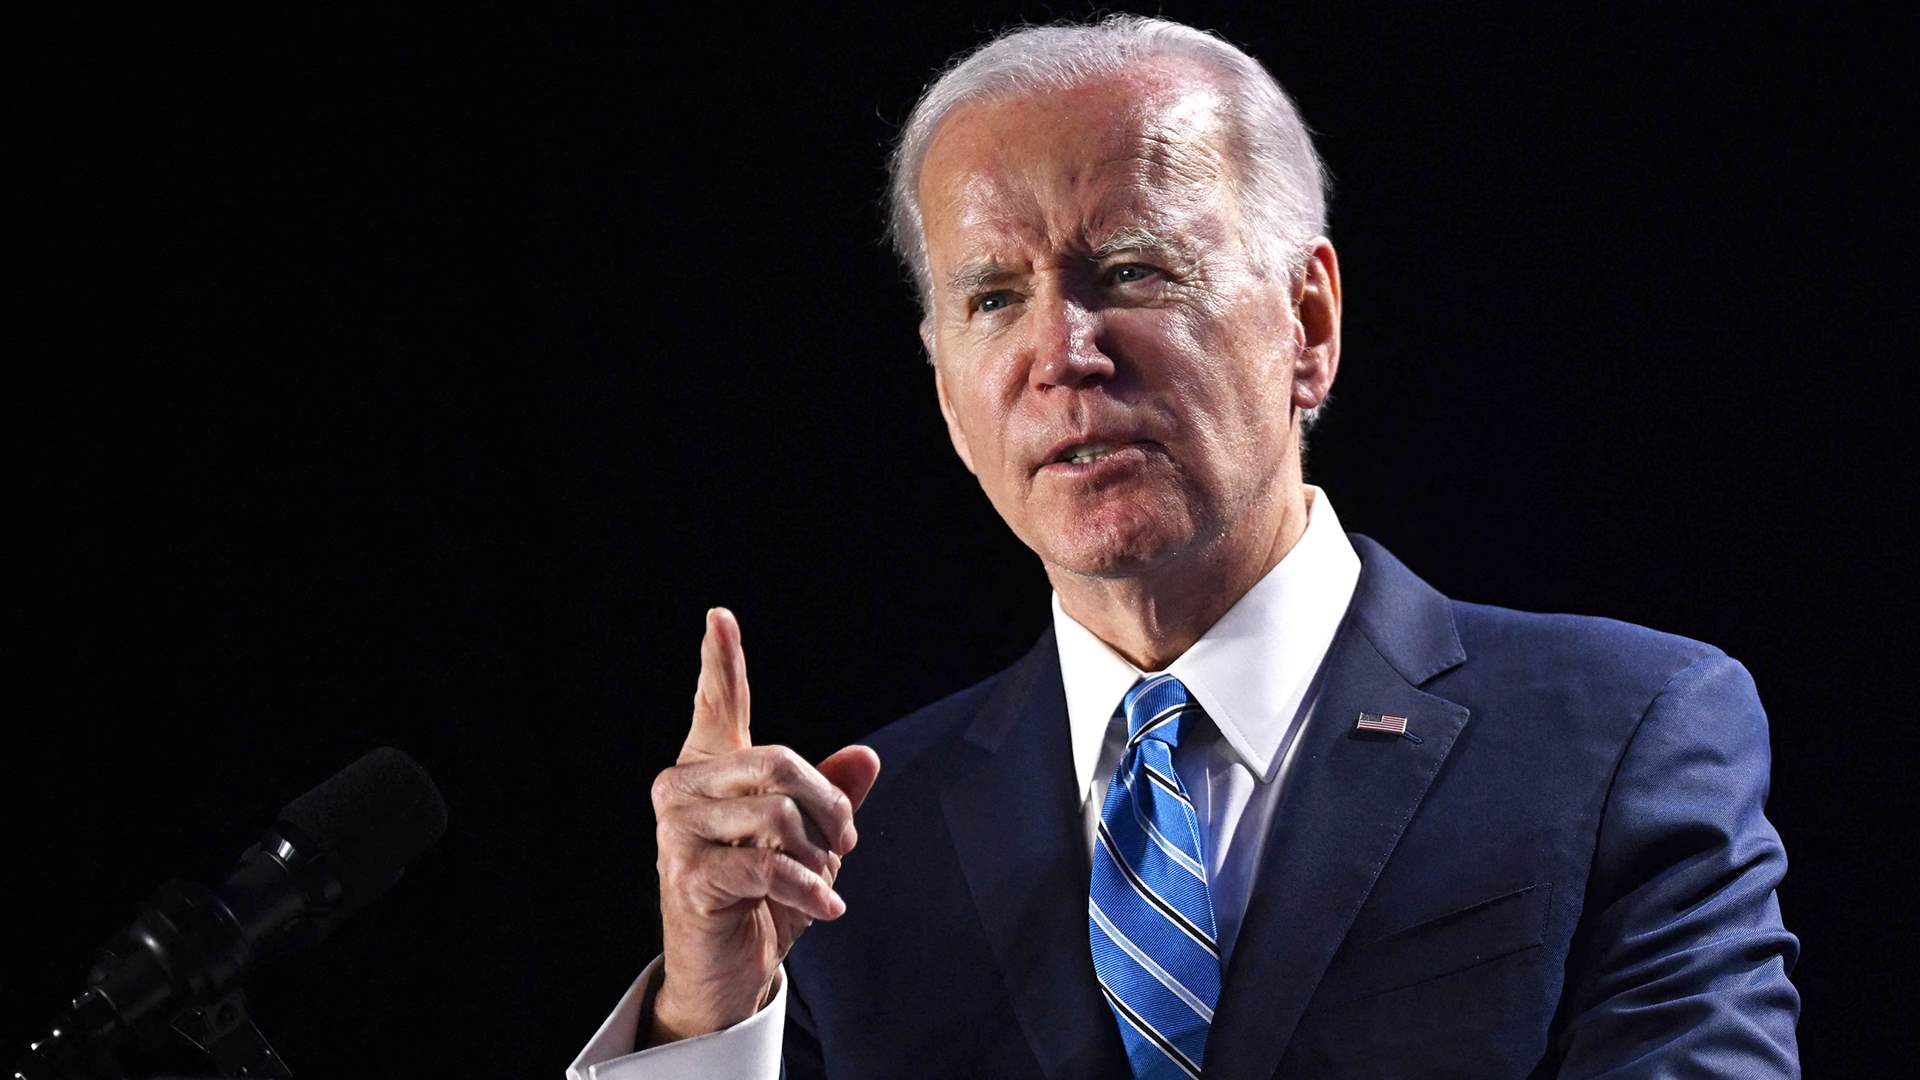 Biden believes Putin &quot;lost the war&quot; and hopes Ukraine&#39;s counter-attack will lead to negotiations with Russia